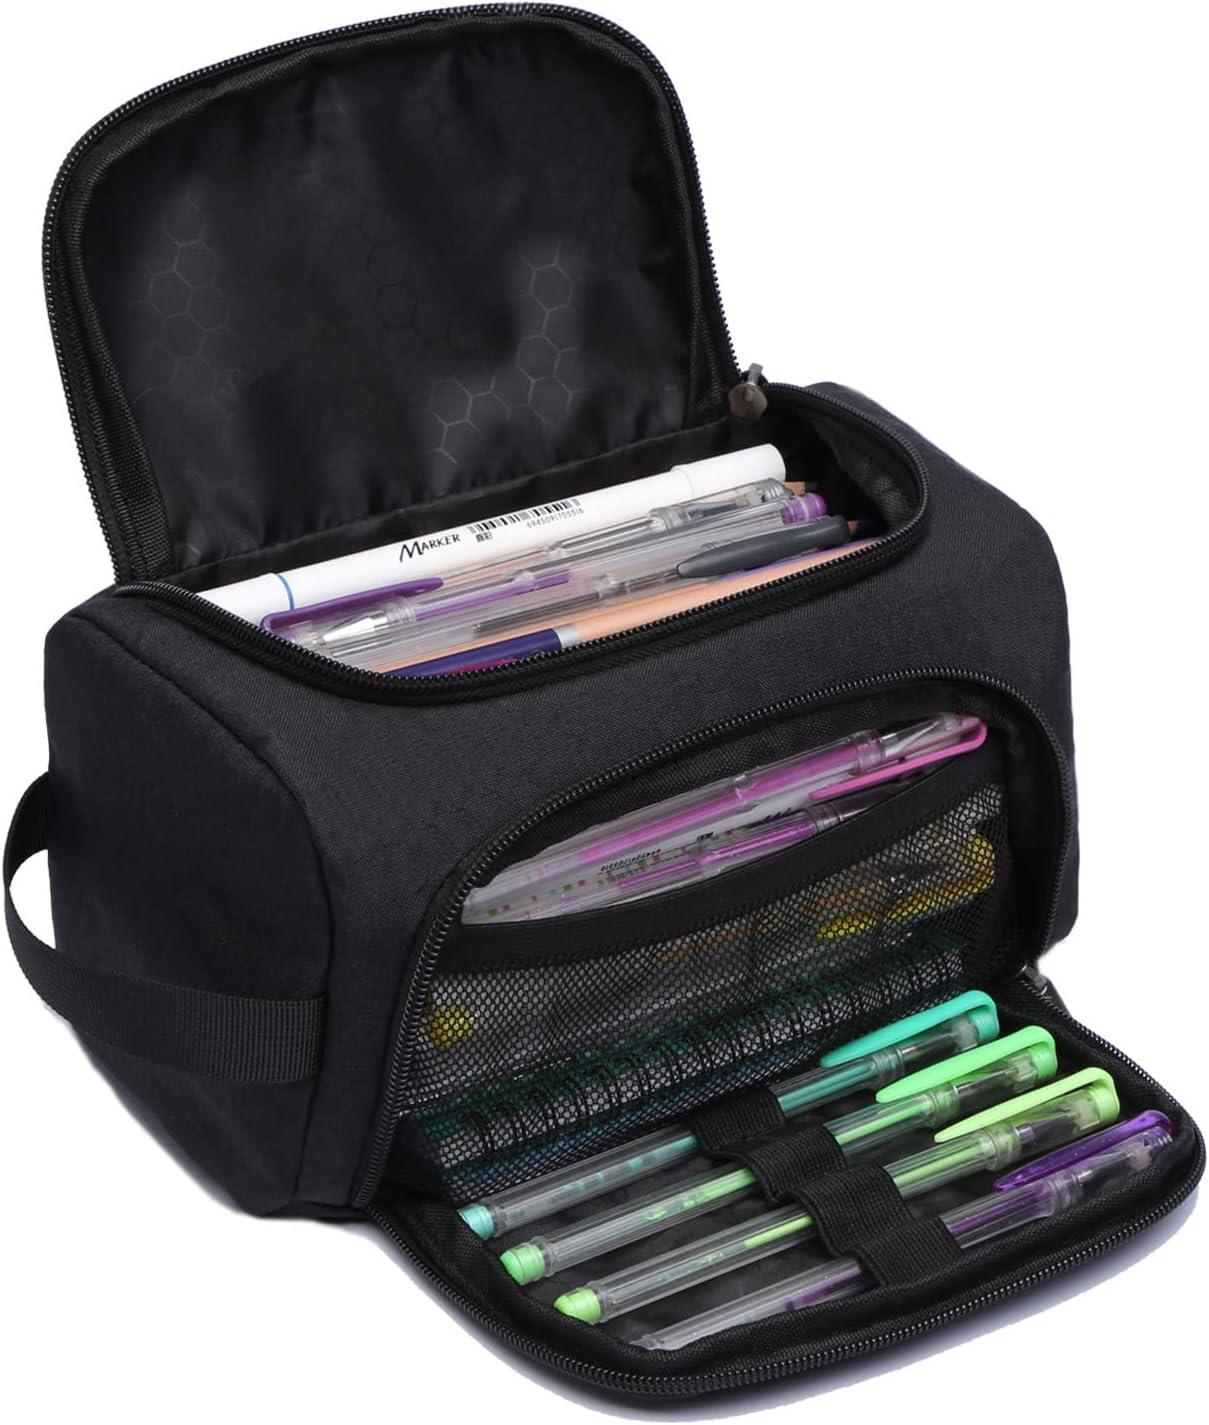 Pencil Case Big Capacity Pen Marker Holder Pouch Box Makeup Bag Oxford  Cloth Large Storage Stationery Organizer with Zipper for School Office -  Gray